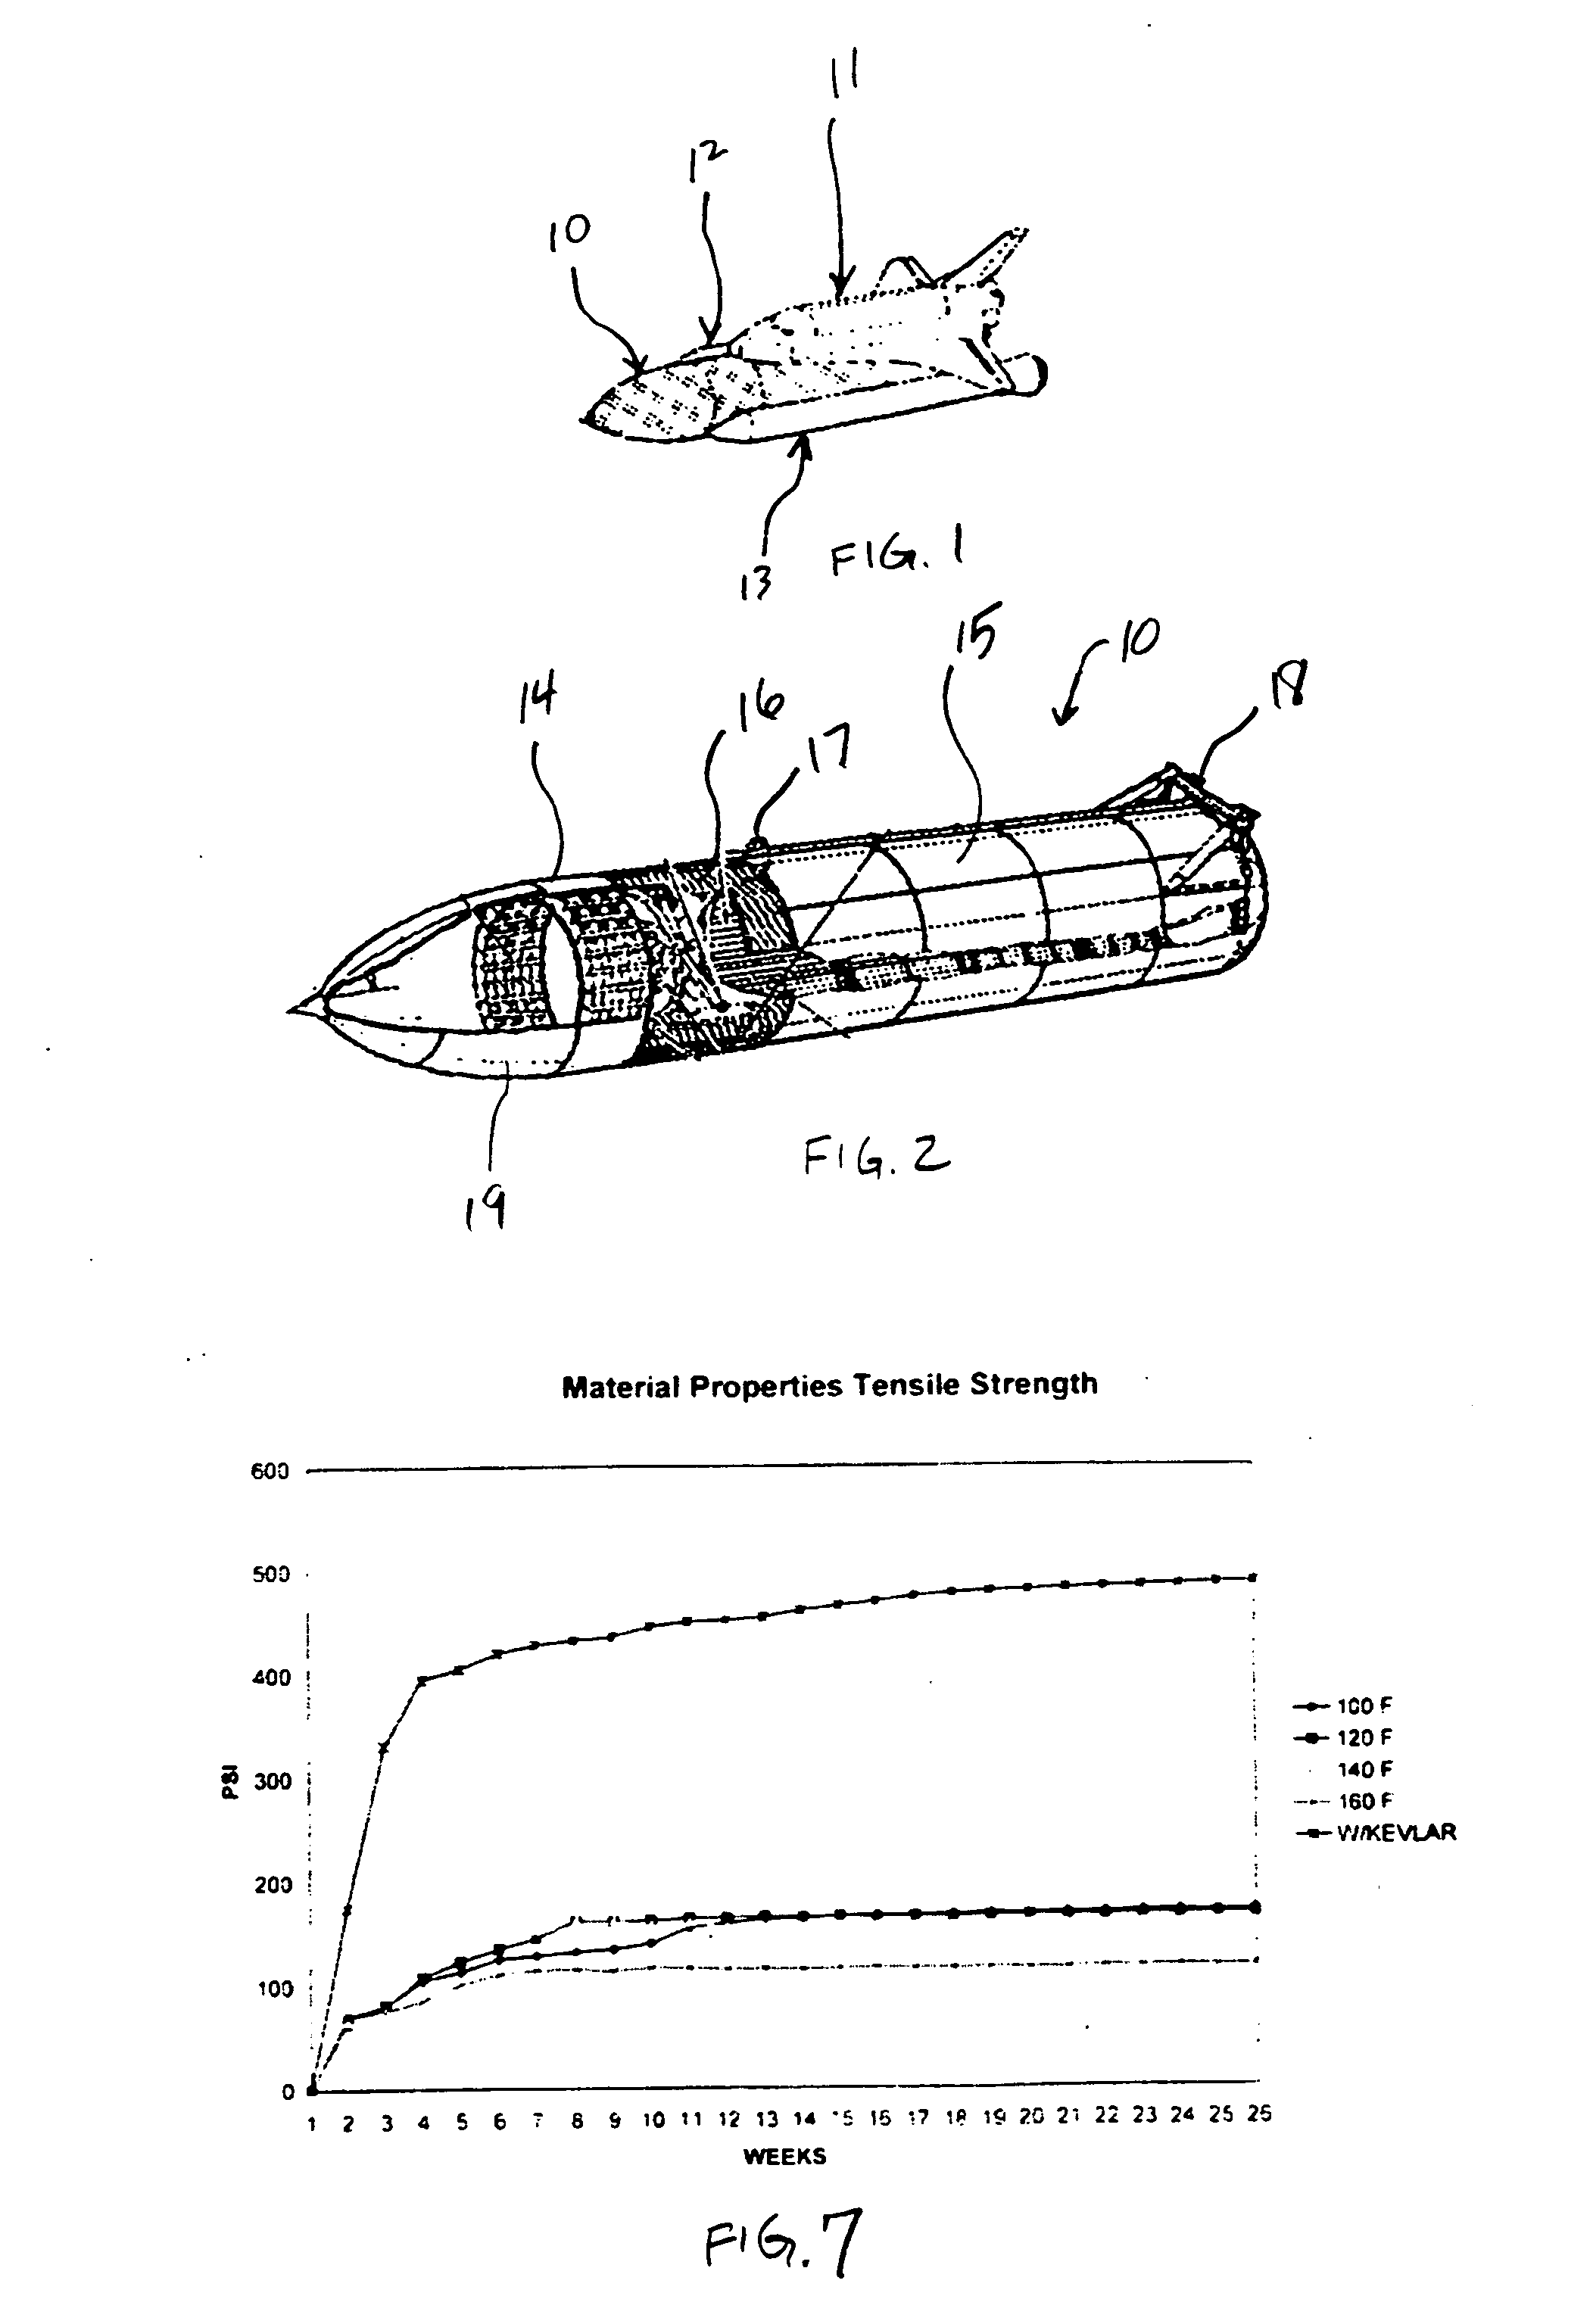 Reinforced foam covering for cryogenic fuel tanks